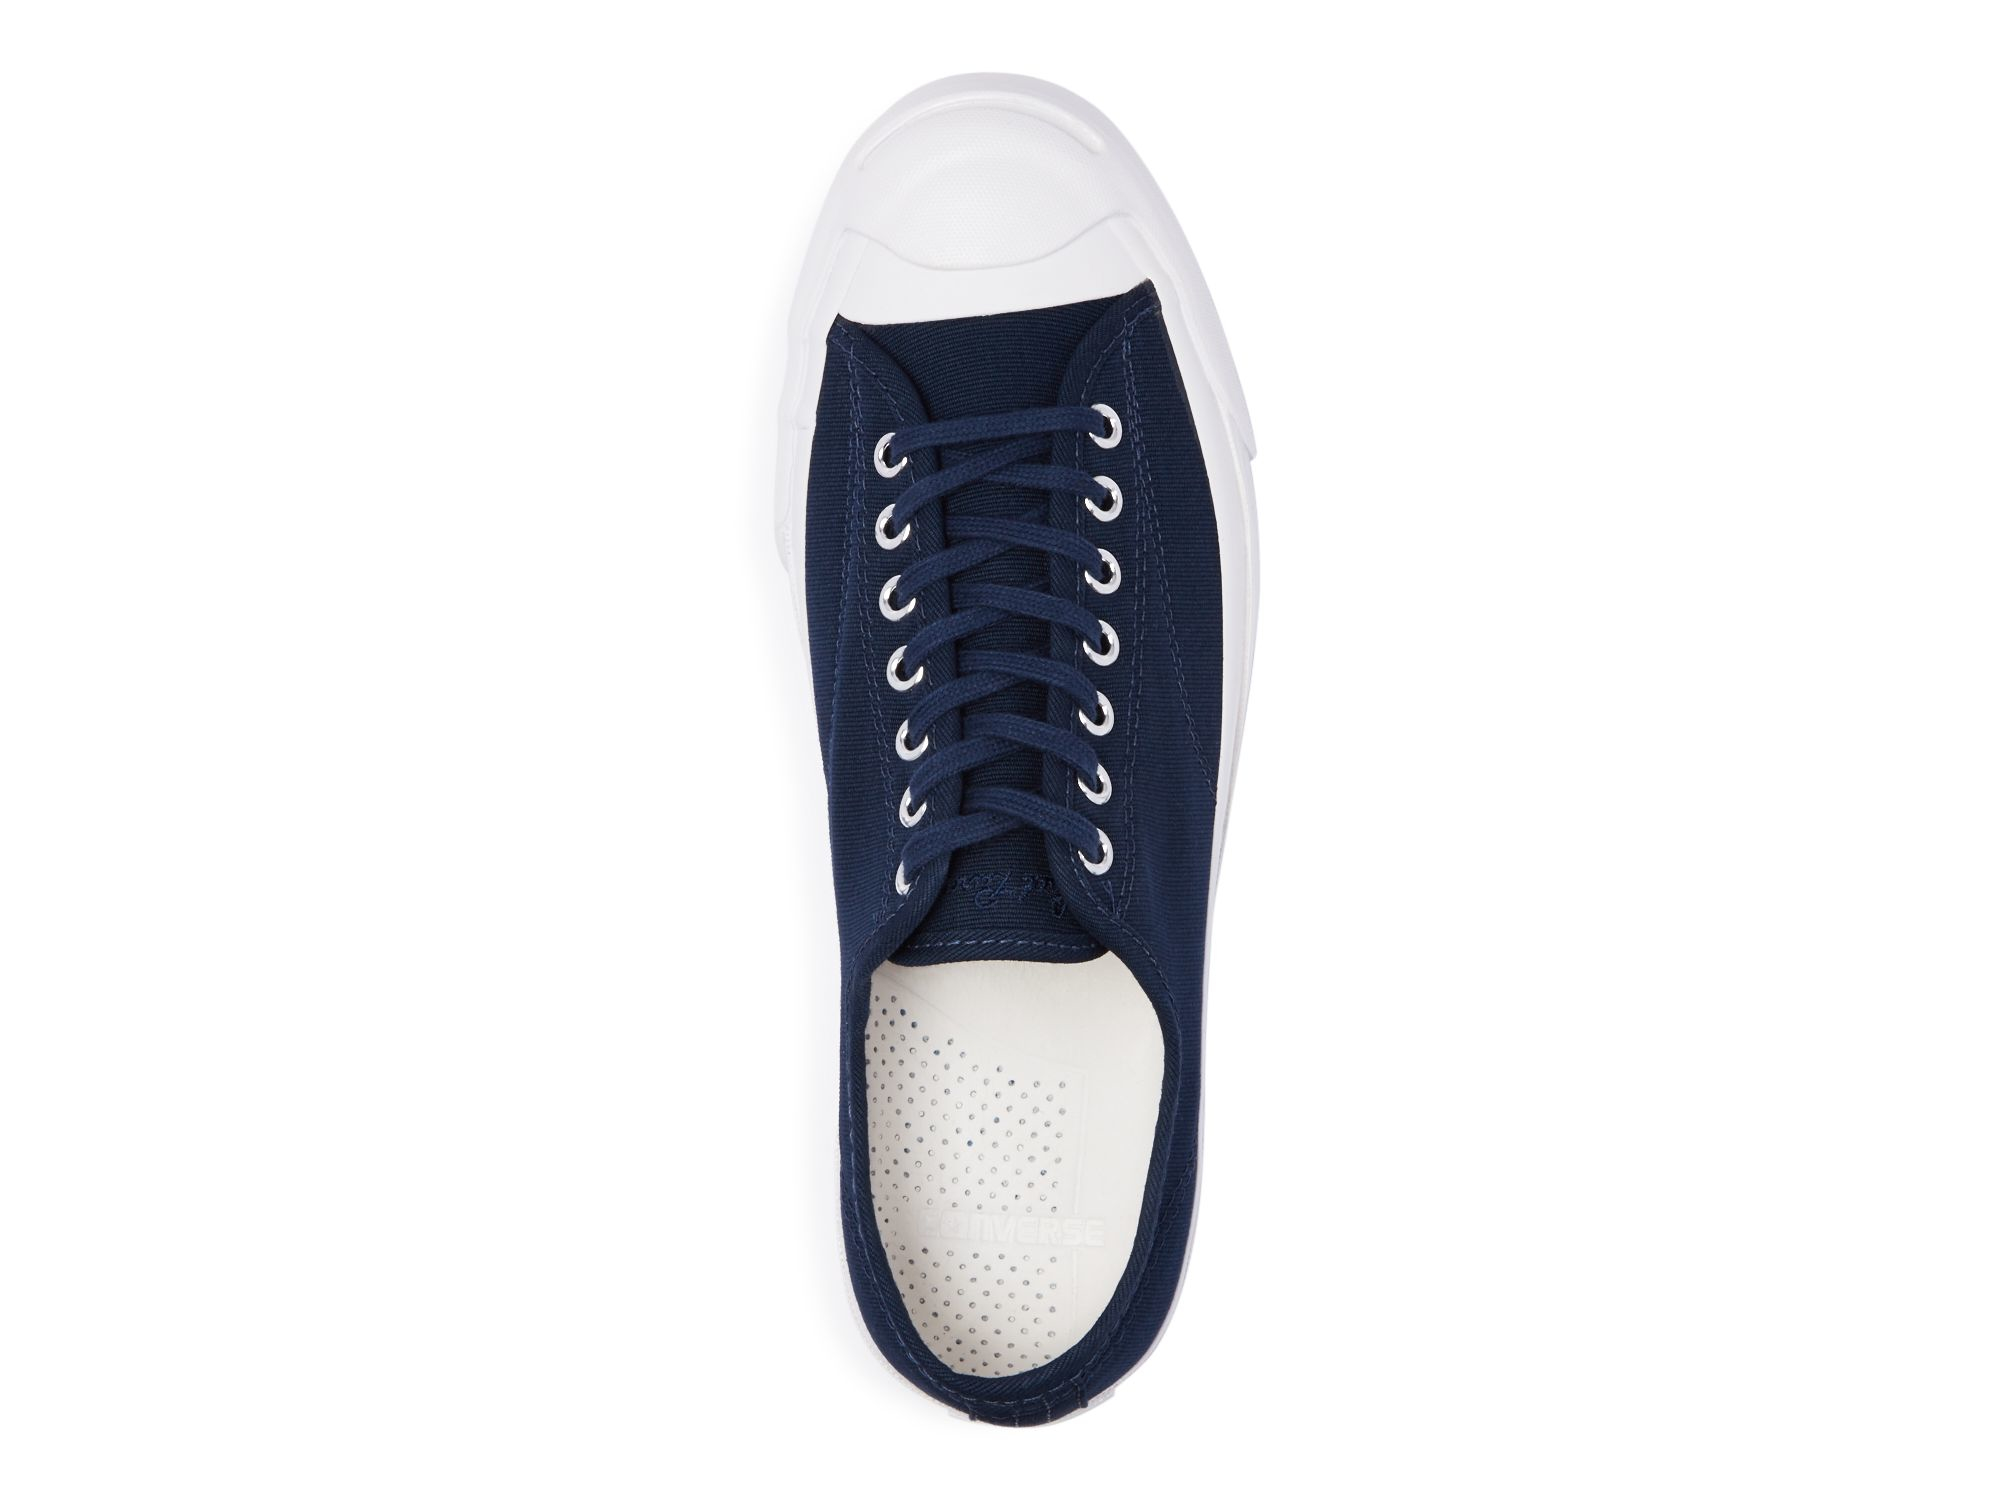 Converse Jack Purcell Signature Jungle Cloth Sneakers in Navy (Blue ...